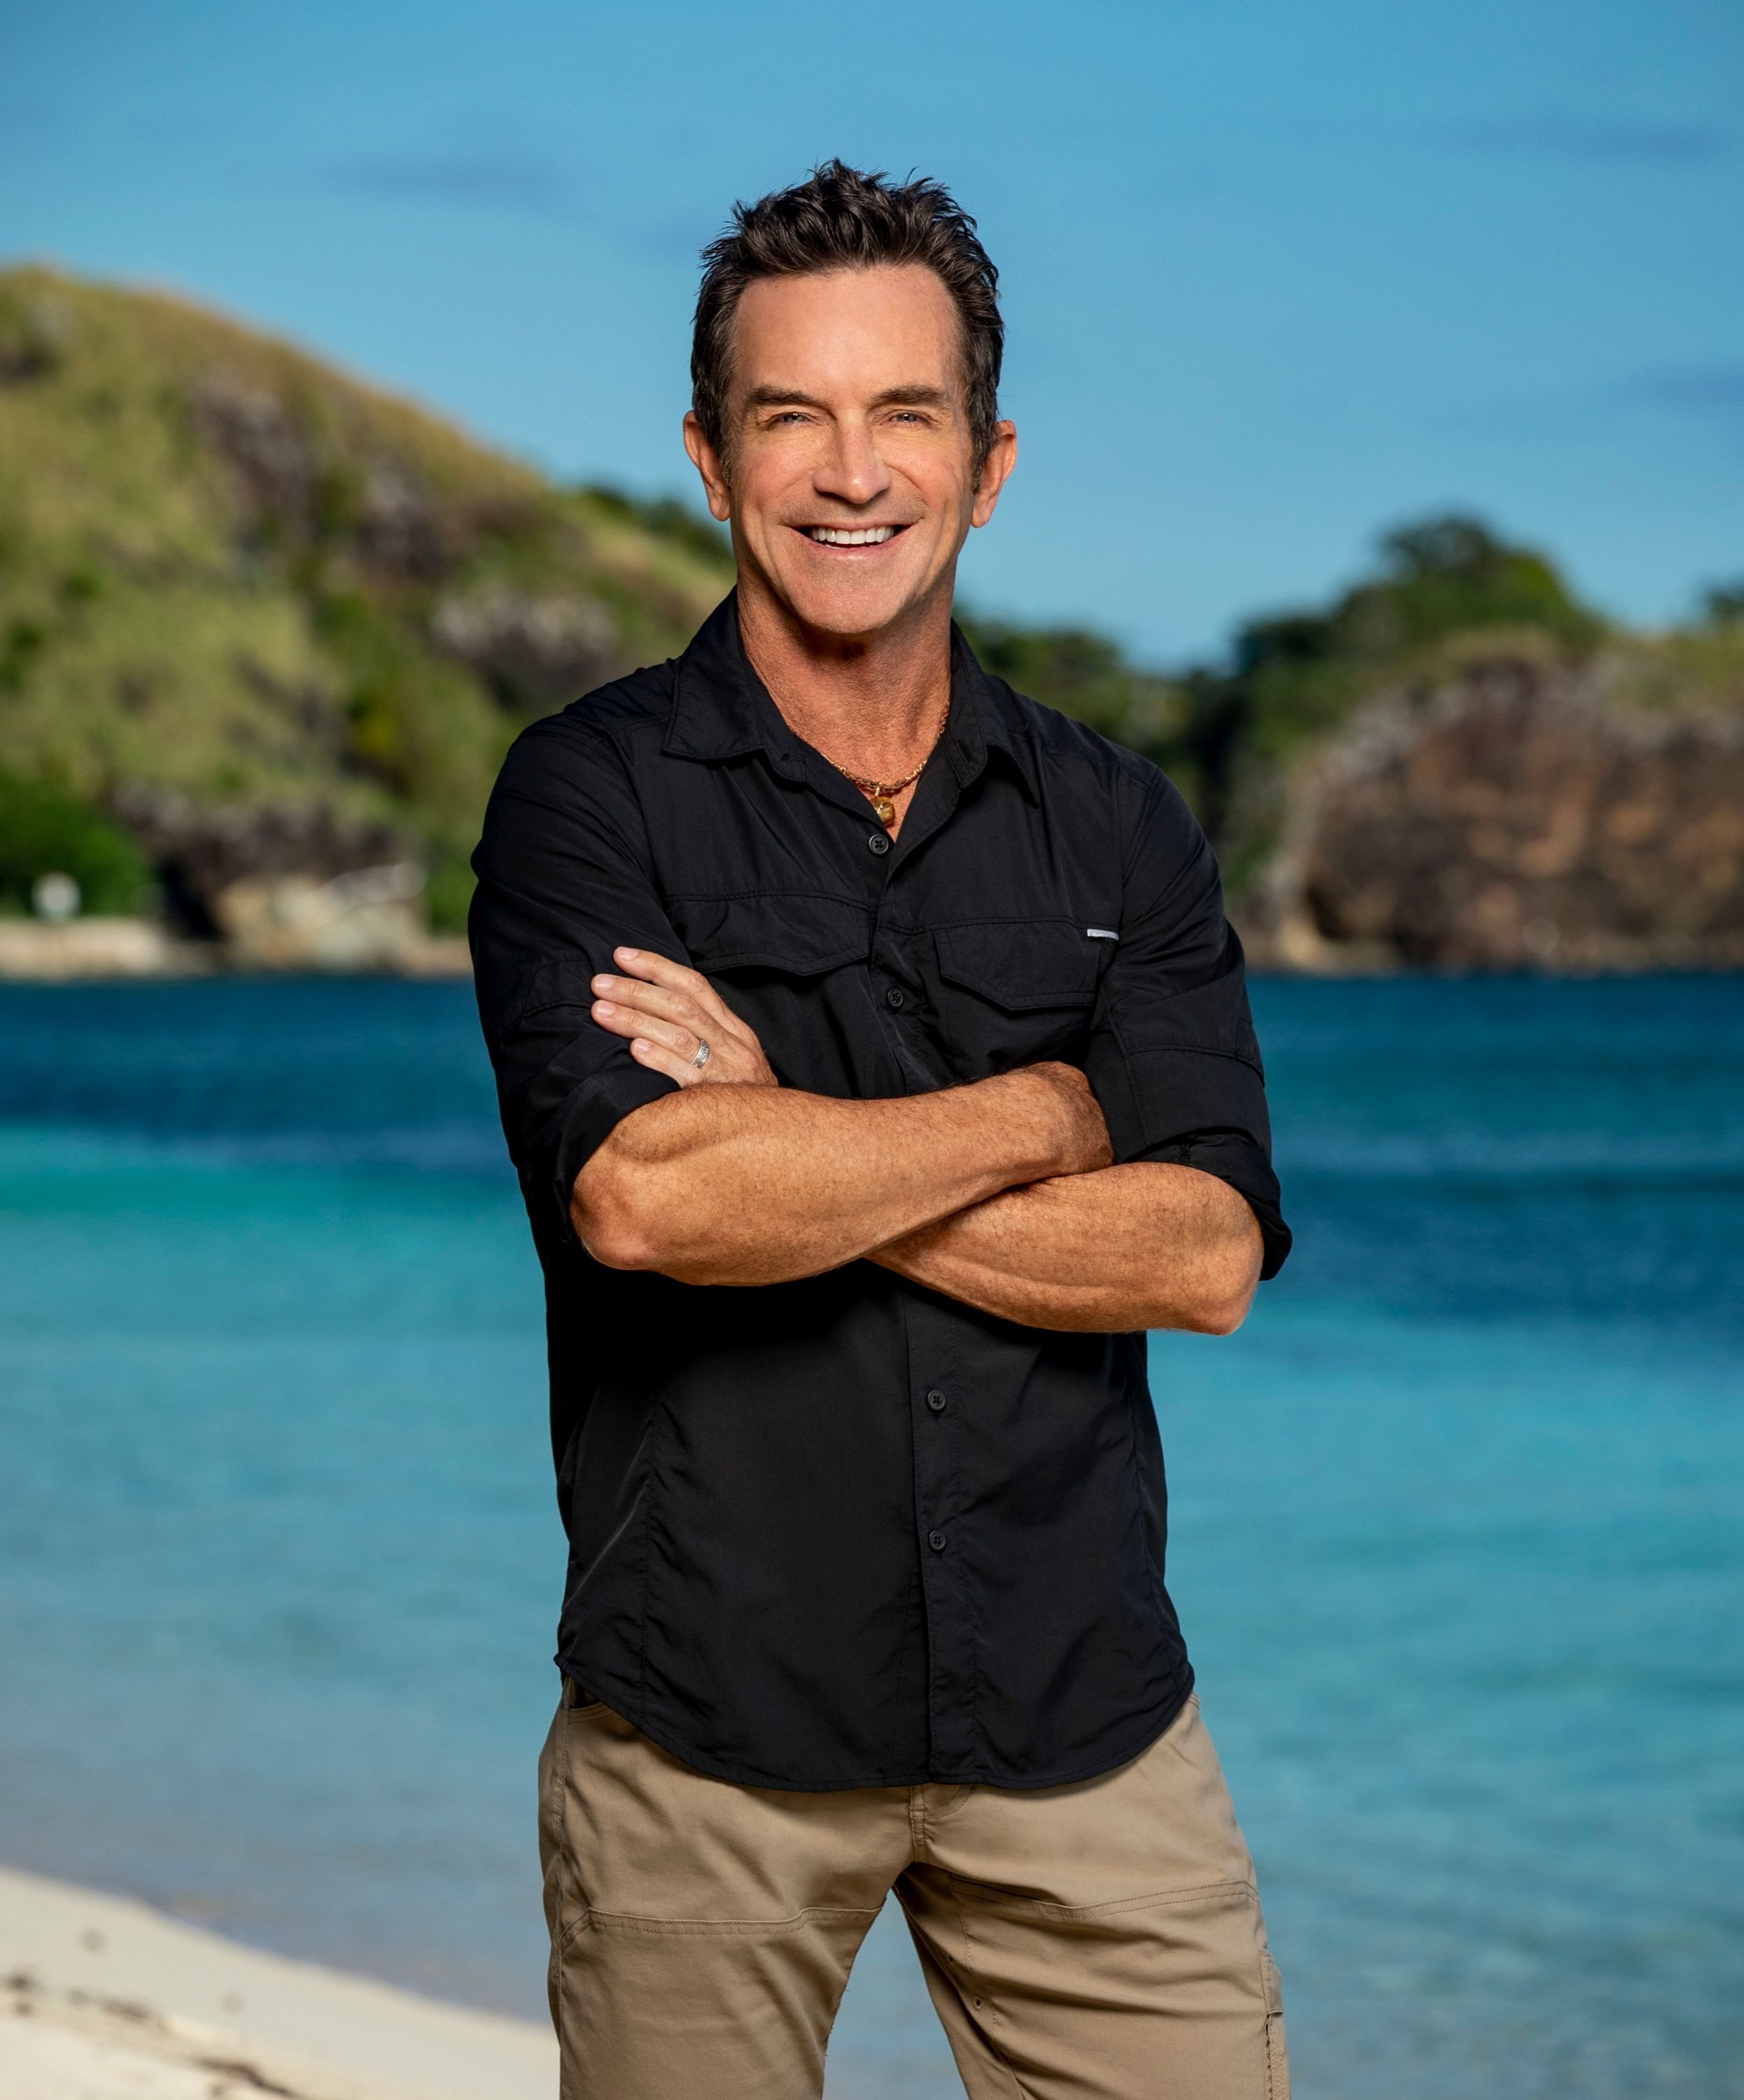 Jeff Probst on location for season 38 of "Survivor: Edge of Extinction" | Source: Getty Images